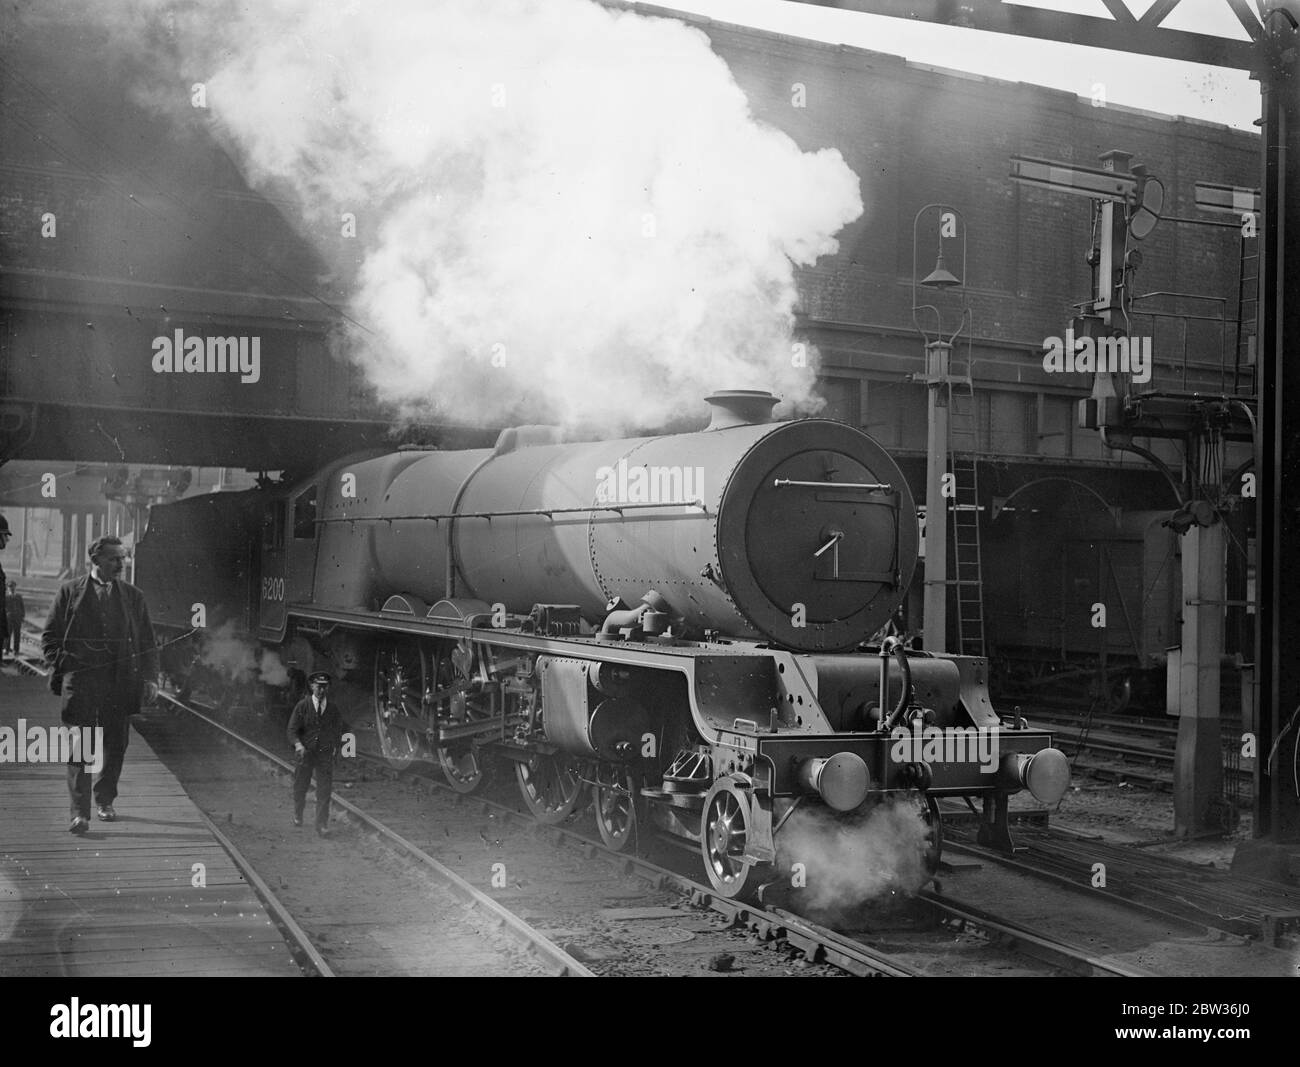 Britains most powerful passenger locomotive at Euston . The first of three giant new locomotives which constitute the most powerful express passenger type in Great Britain made its first appearance at Euston Station , London . The engine has been designed for duty on the heaviest Anglo Scottish expresses of the LMS . Photo shows , the new locomotive entering Euston Station , London . 28 June 1933 Stock Photo